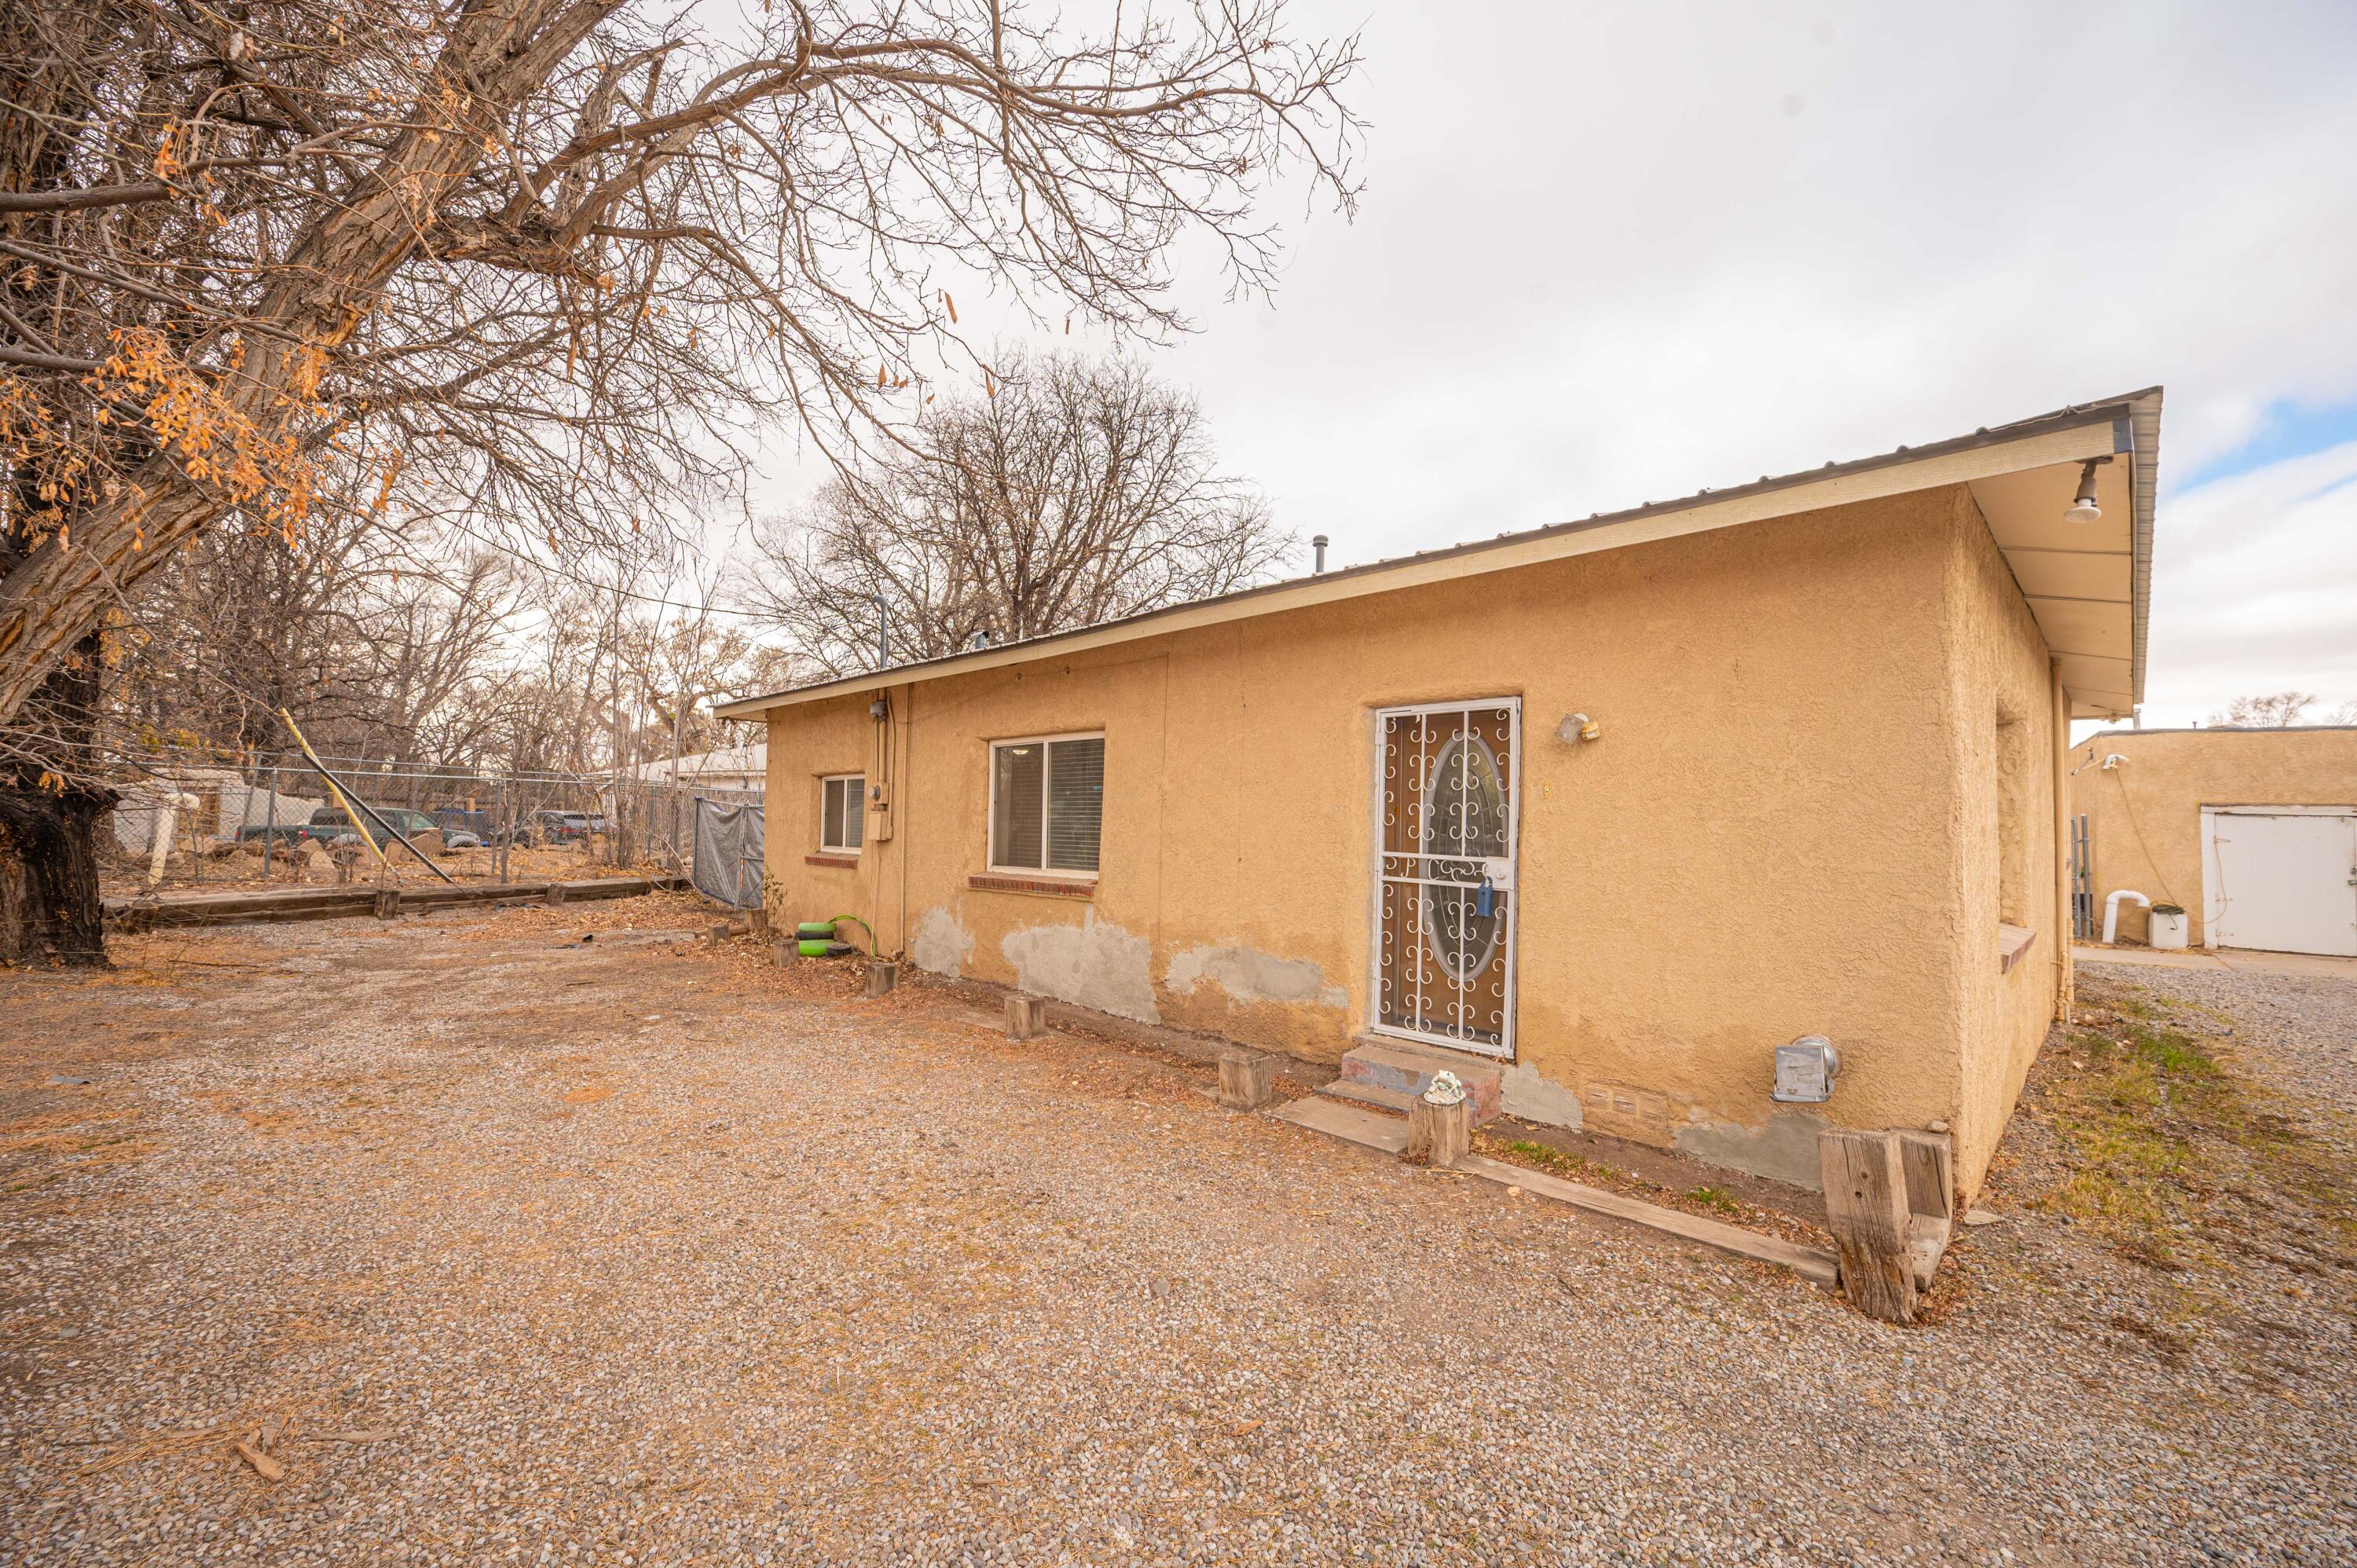 A nice 2 bedroom adobe home on a 1/4 acre in the South Valley. Enjoy your yard from either the covered patio or screened porch. Water is on private well but sewer is city. A great investment opportunity. New metal roof and updated bathroom (less than a year). Come, visit and make this home yours!